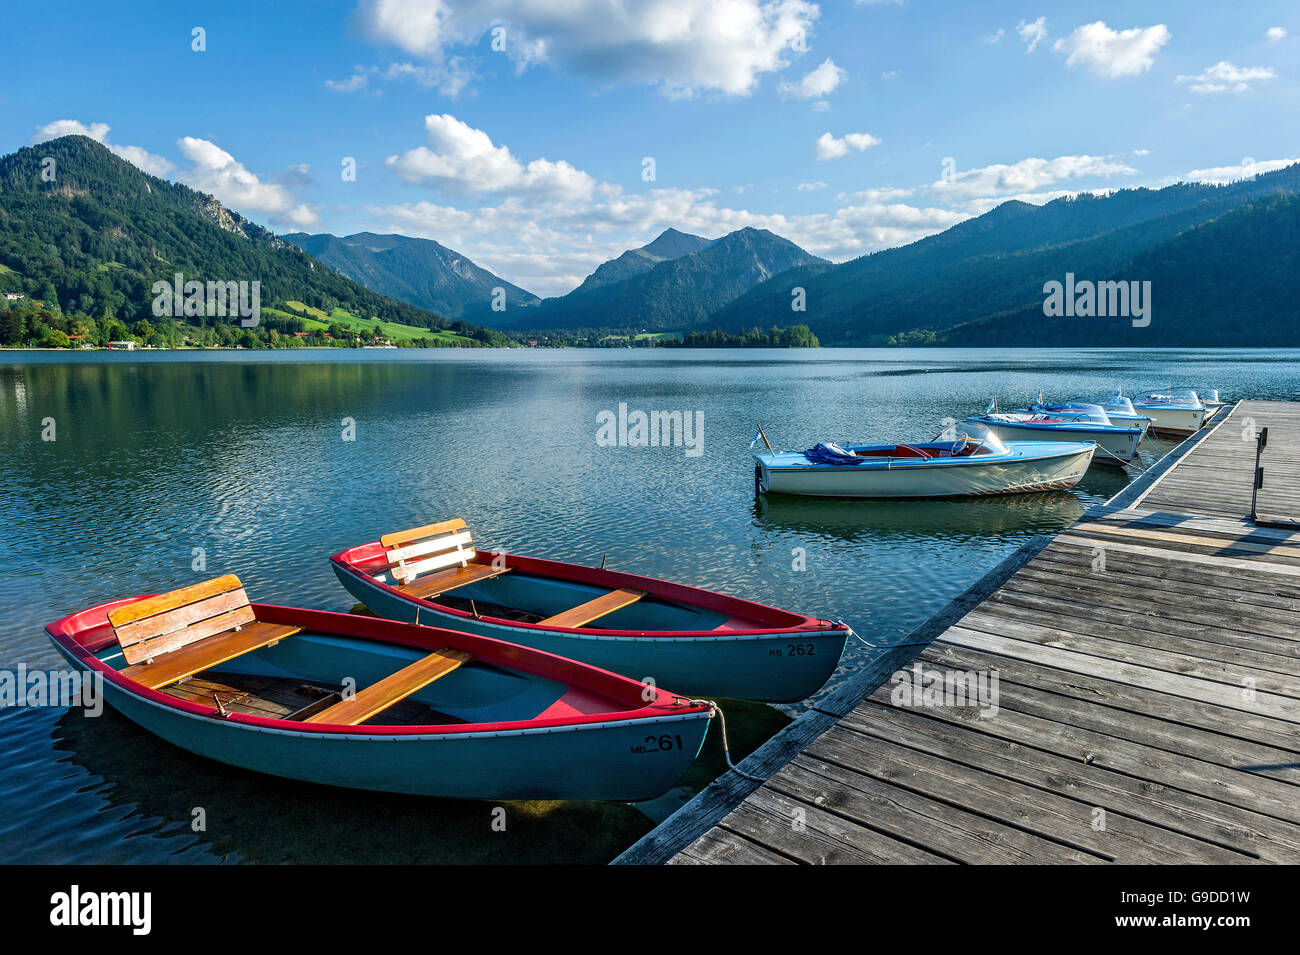 Rowing boats and electric boats at jetty, Schliersee, Markt Schliersee, mountains Brecherspitz and Spitzingsattel Stock Photo